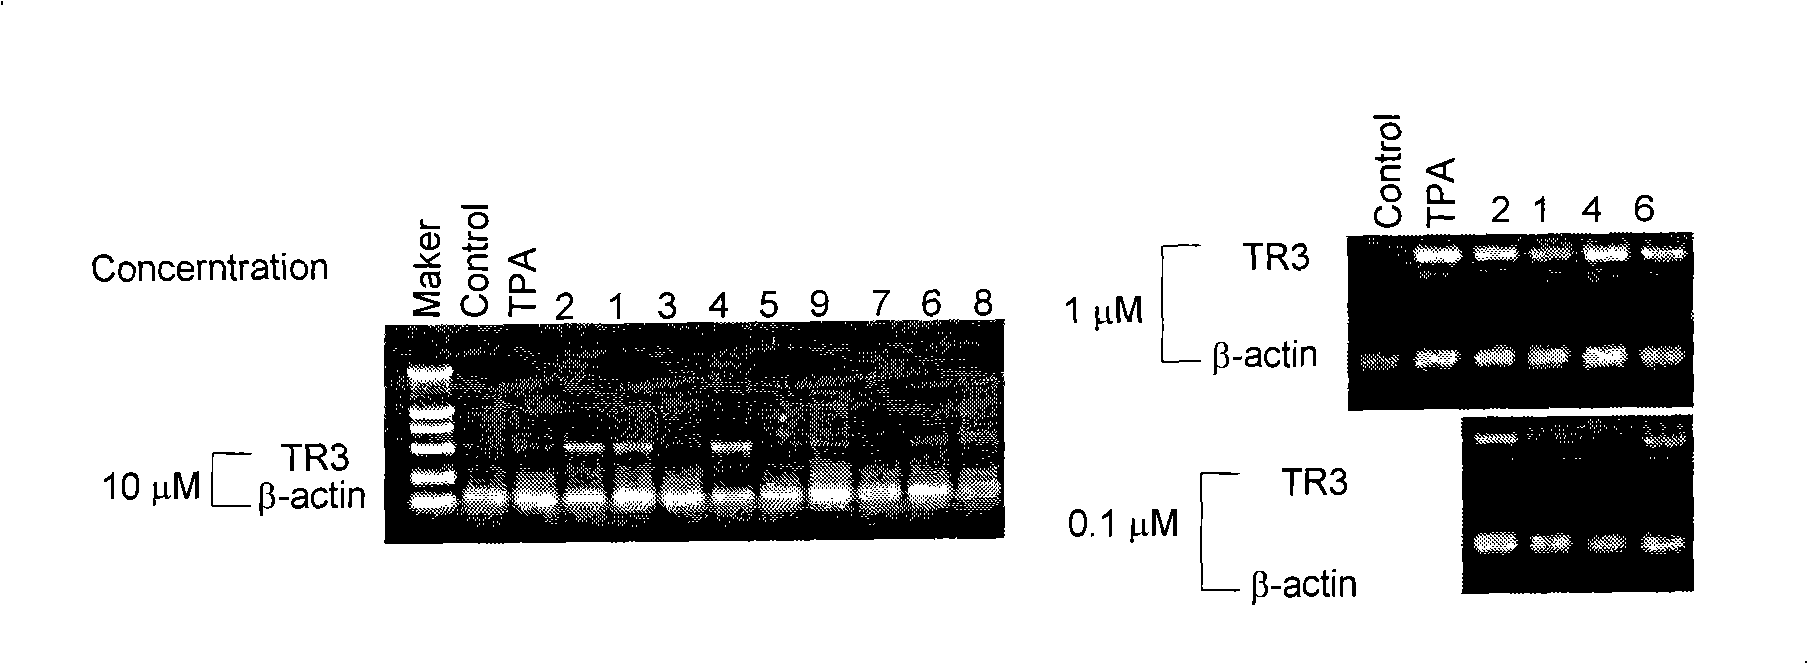 Induced nuclear receptor TR3 expressed cardiac glycoside compounds and use thereof